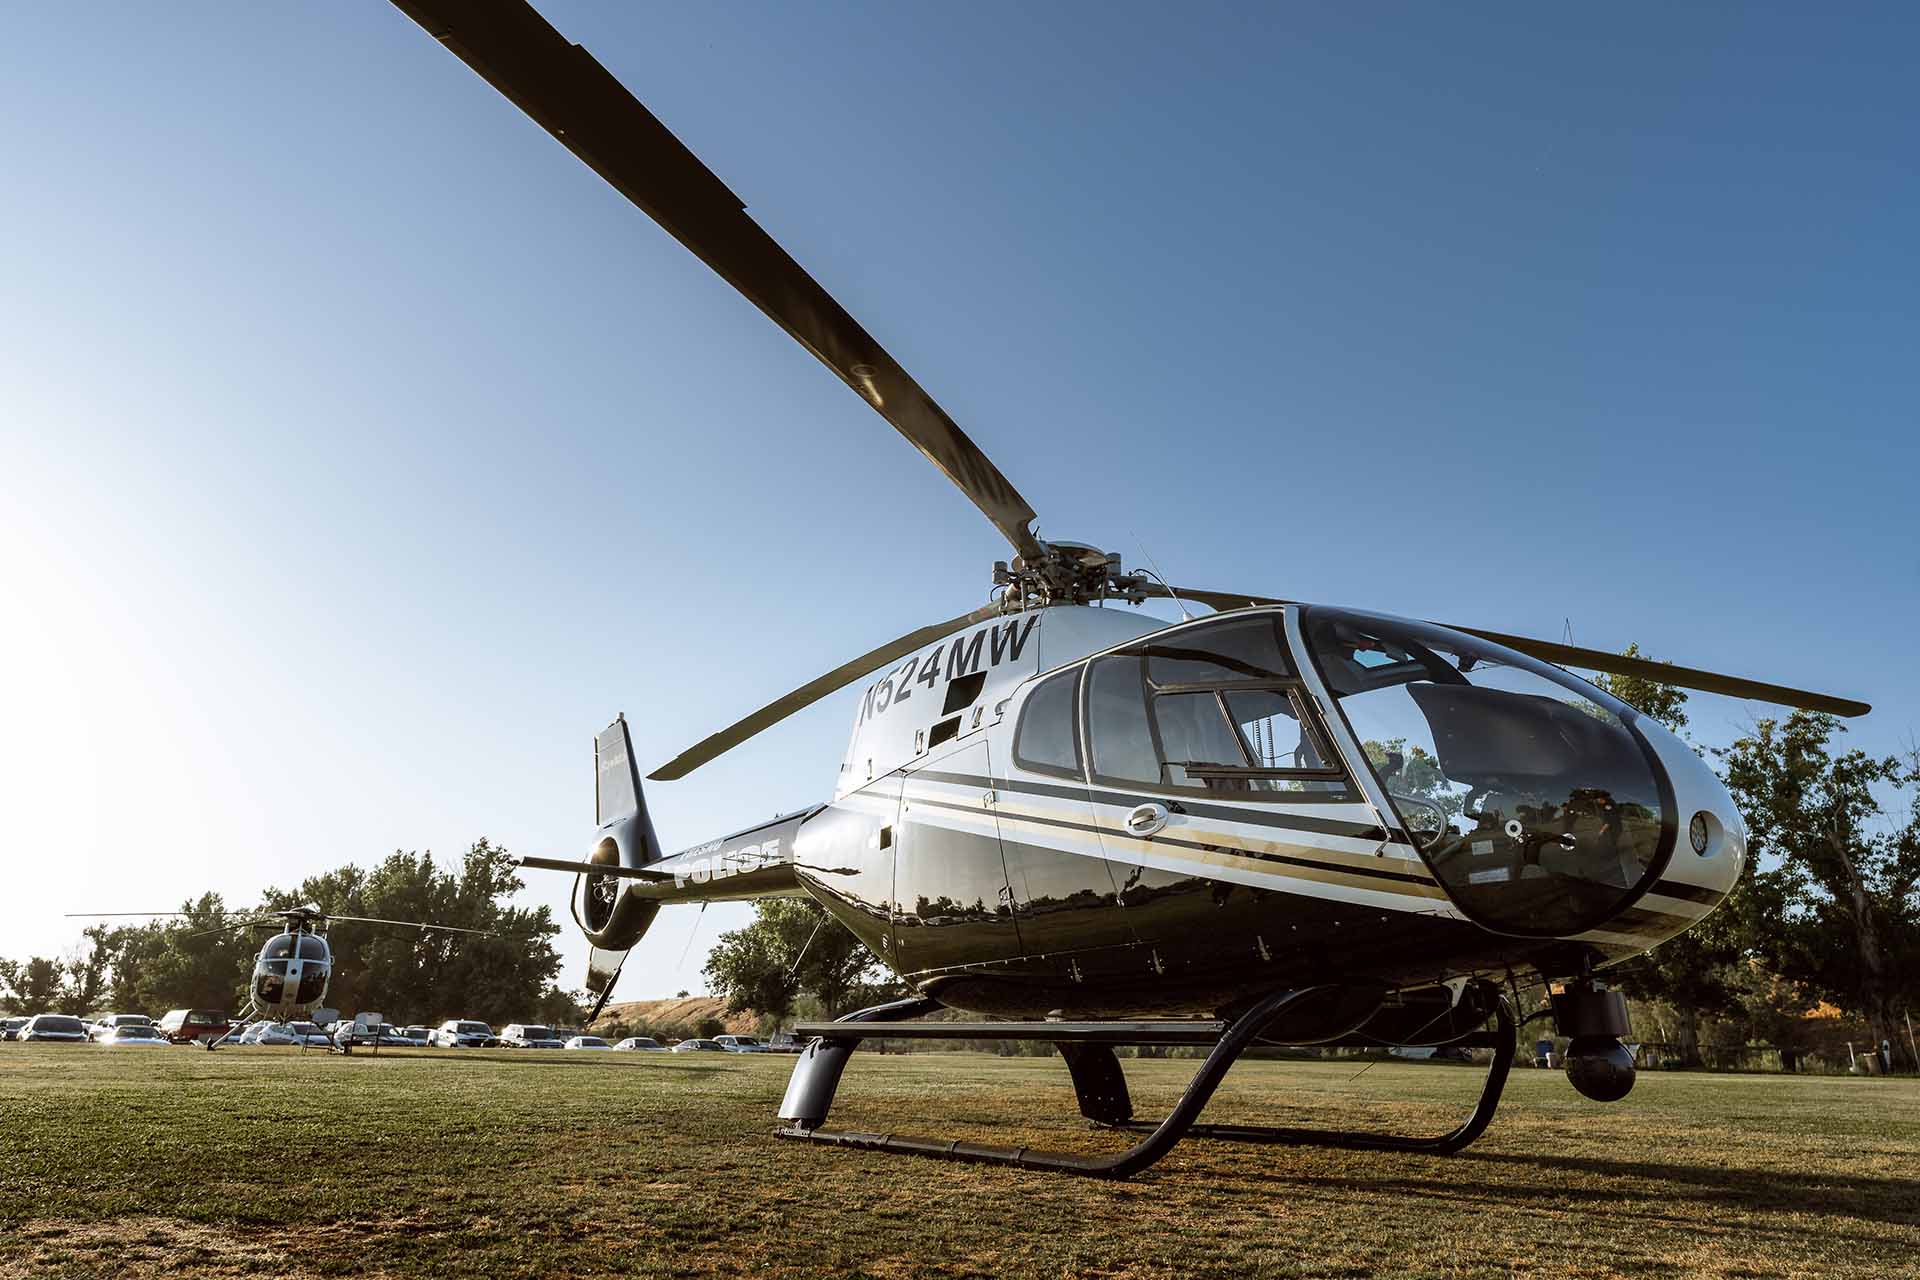 Two Fresno Police helicopters parked in a neatly mown field. The helicopters feature sleek black and silver designs with striking black and gold diagonal stripes running across the middle on the sides.